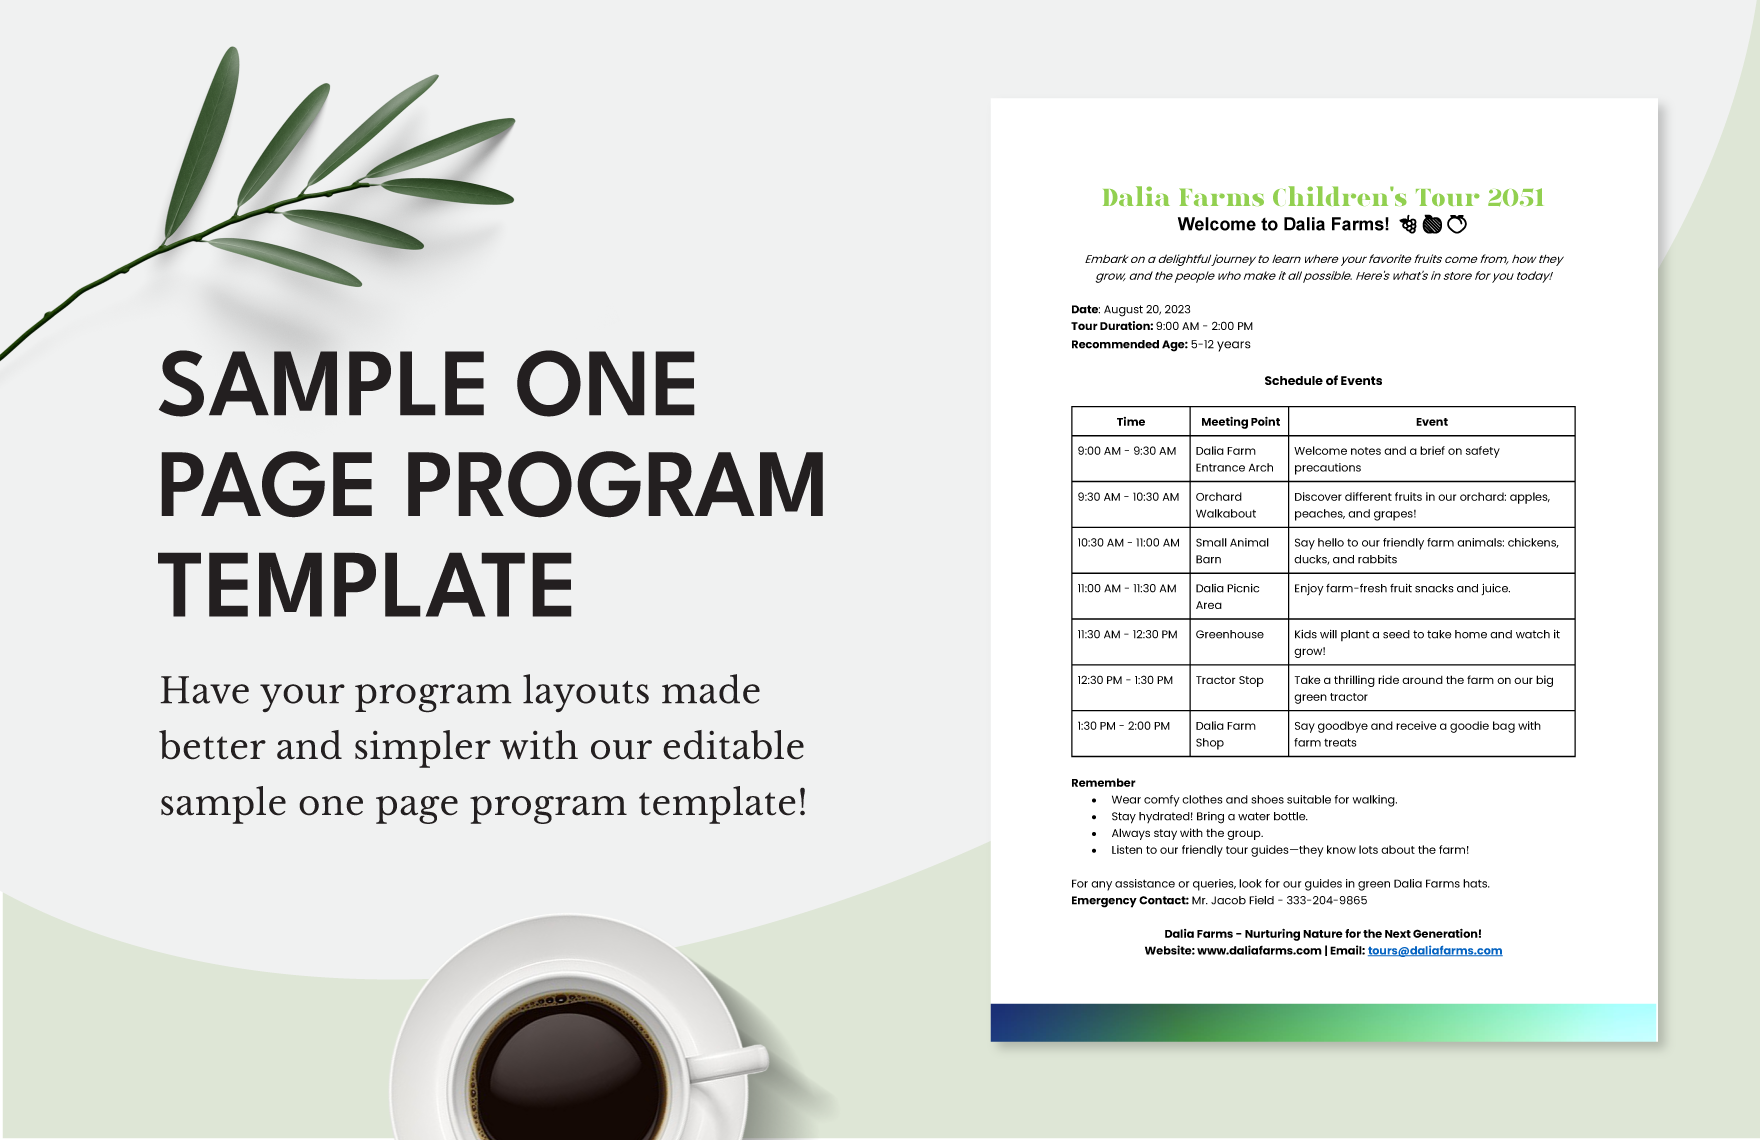 Sample One Page Program Template